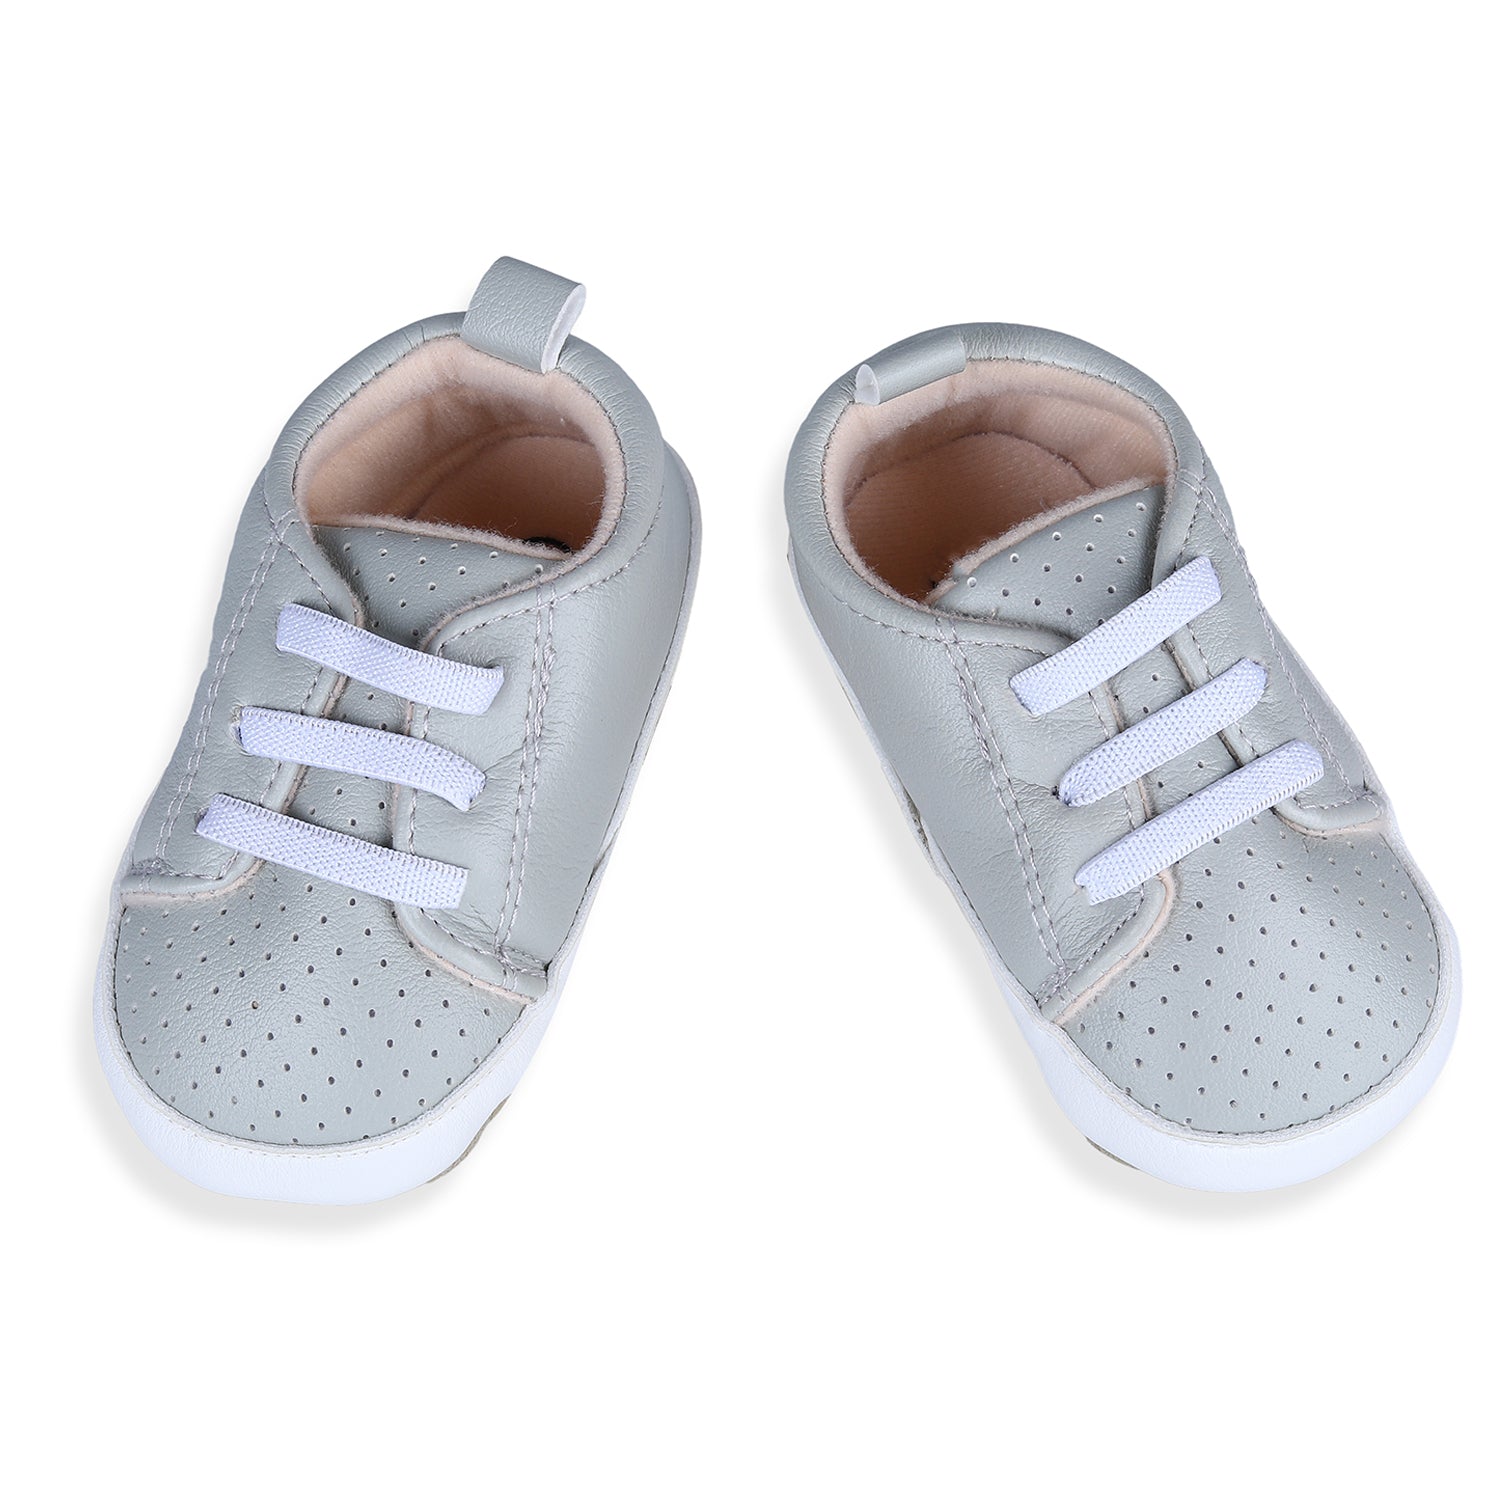 Baby Moo Lace-Up Comfortable And Breathable Infant Anti-Slip Sneaker Shoes - Grey